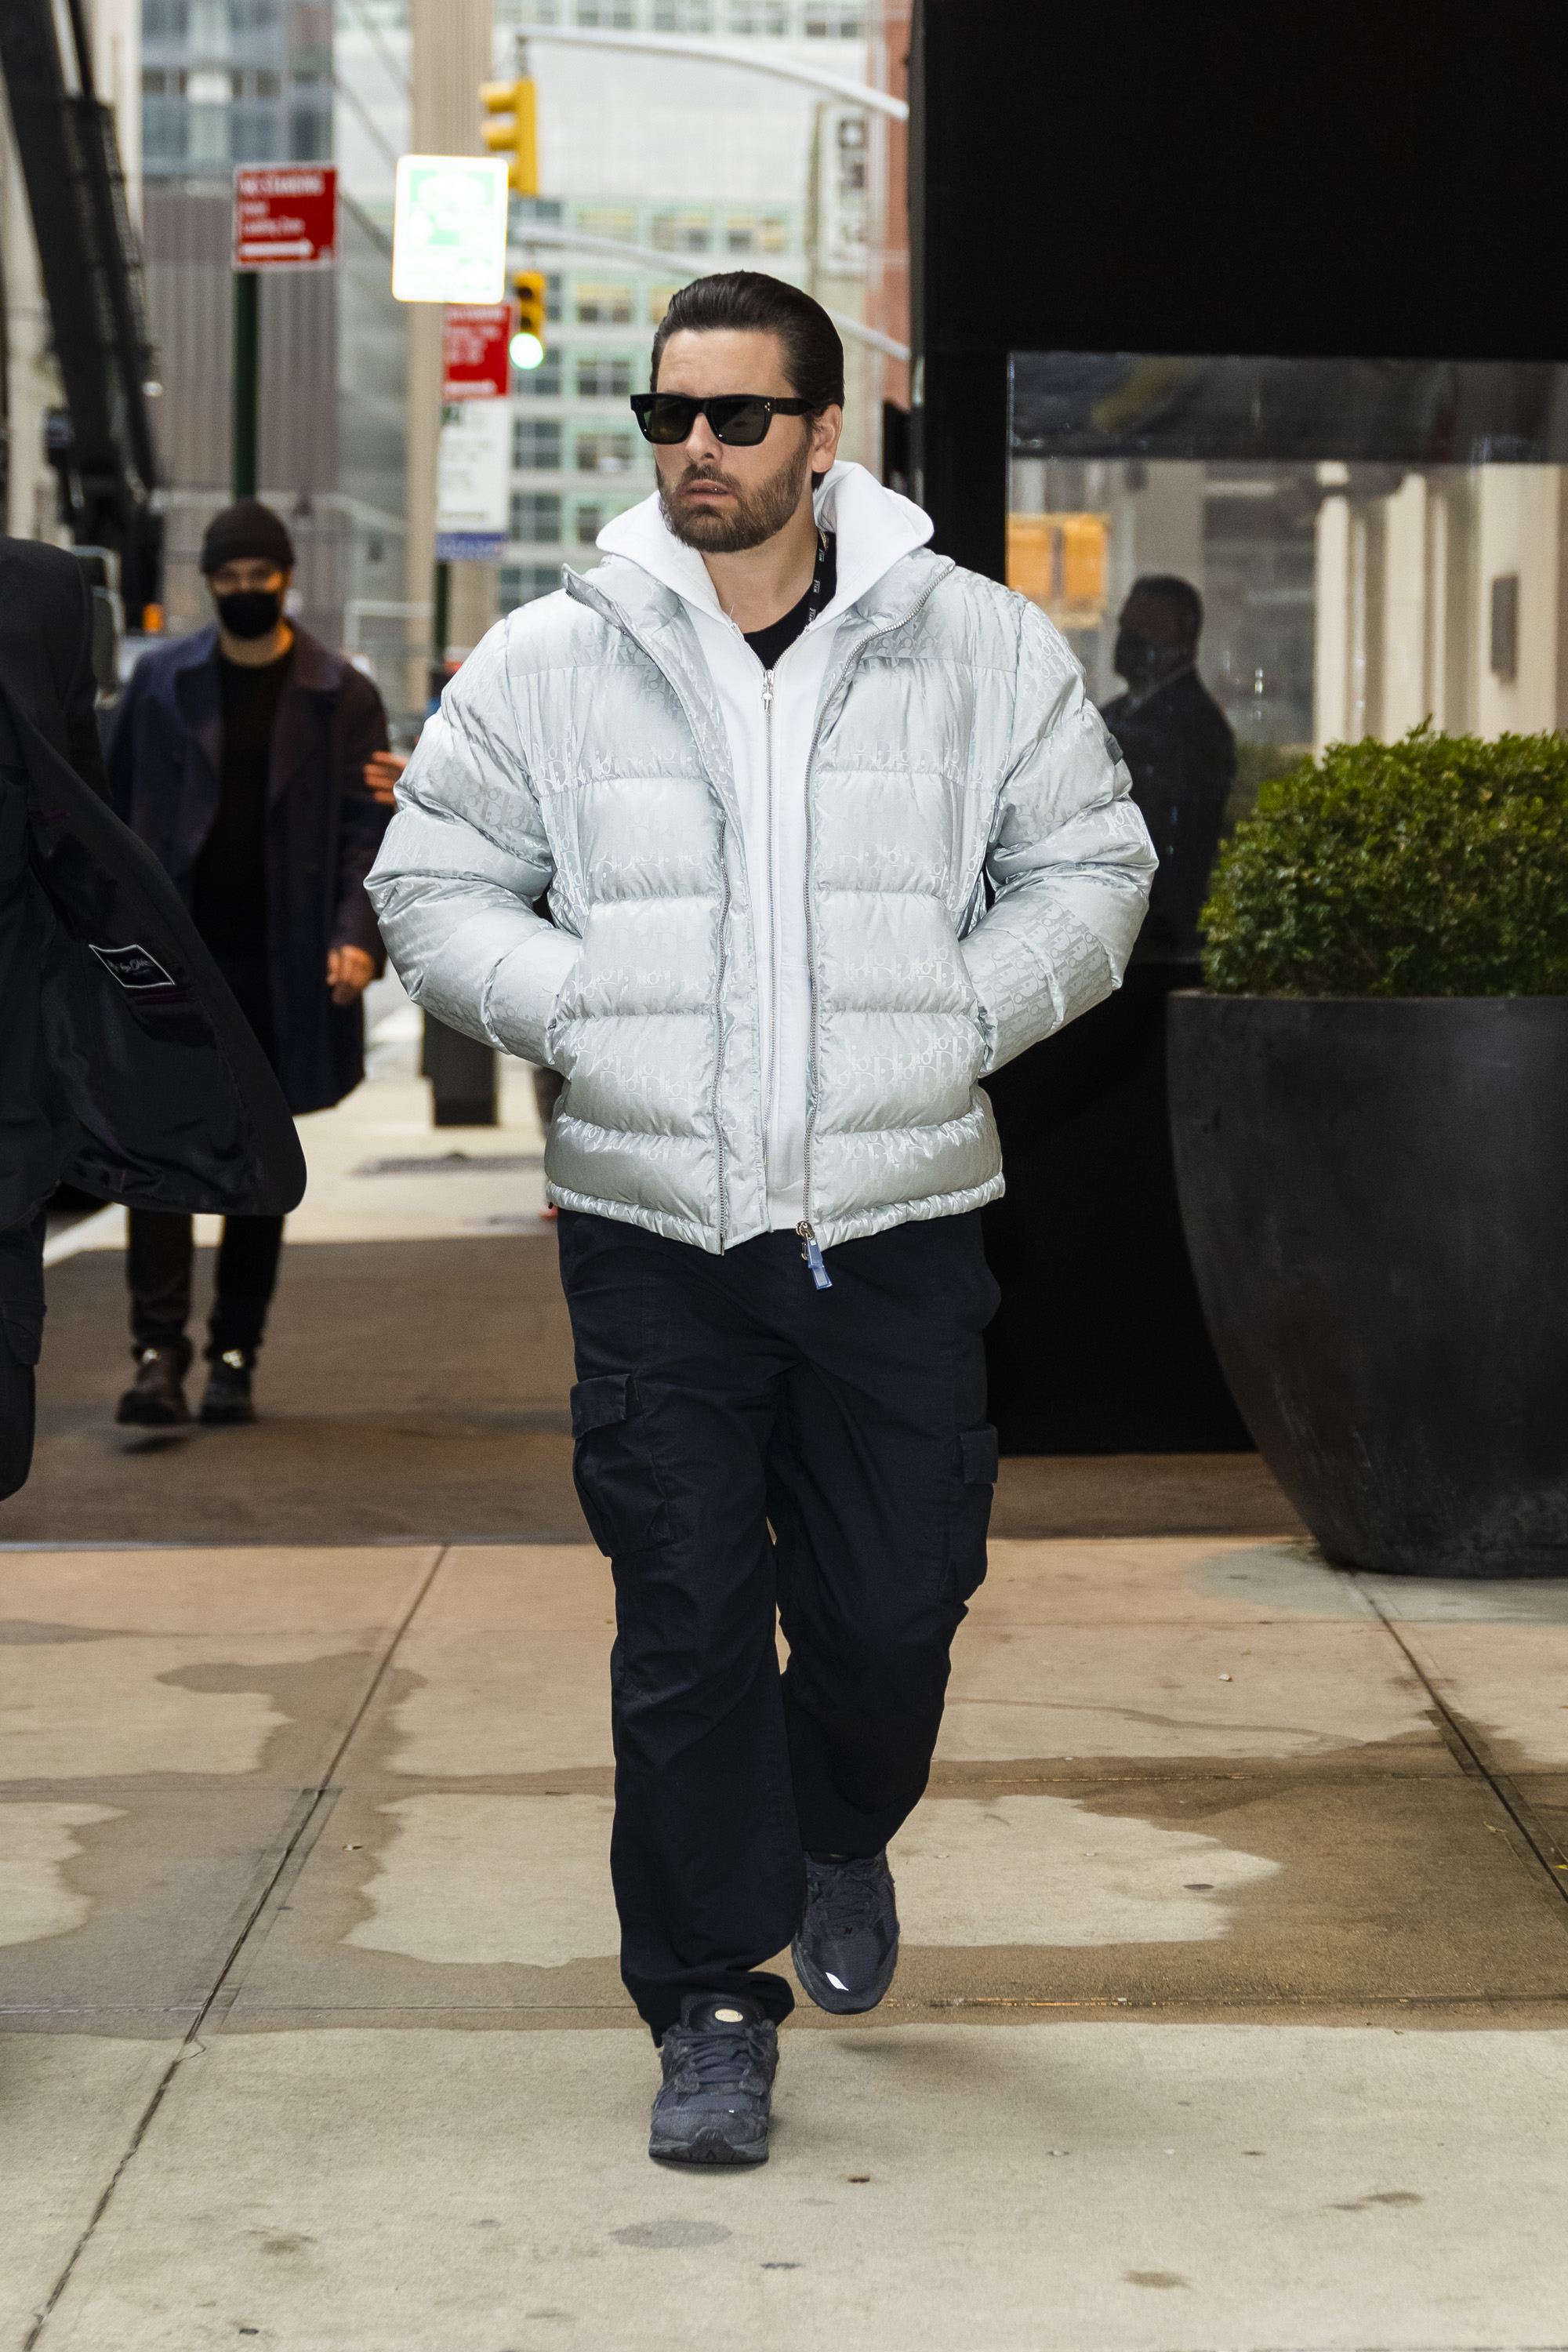 Scott walking down the street while wearing a puffy jacket and sunglasses